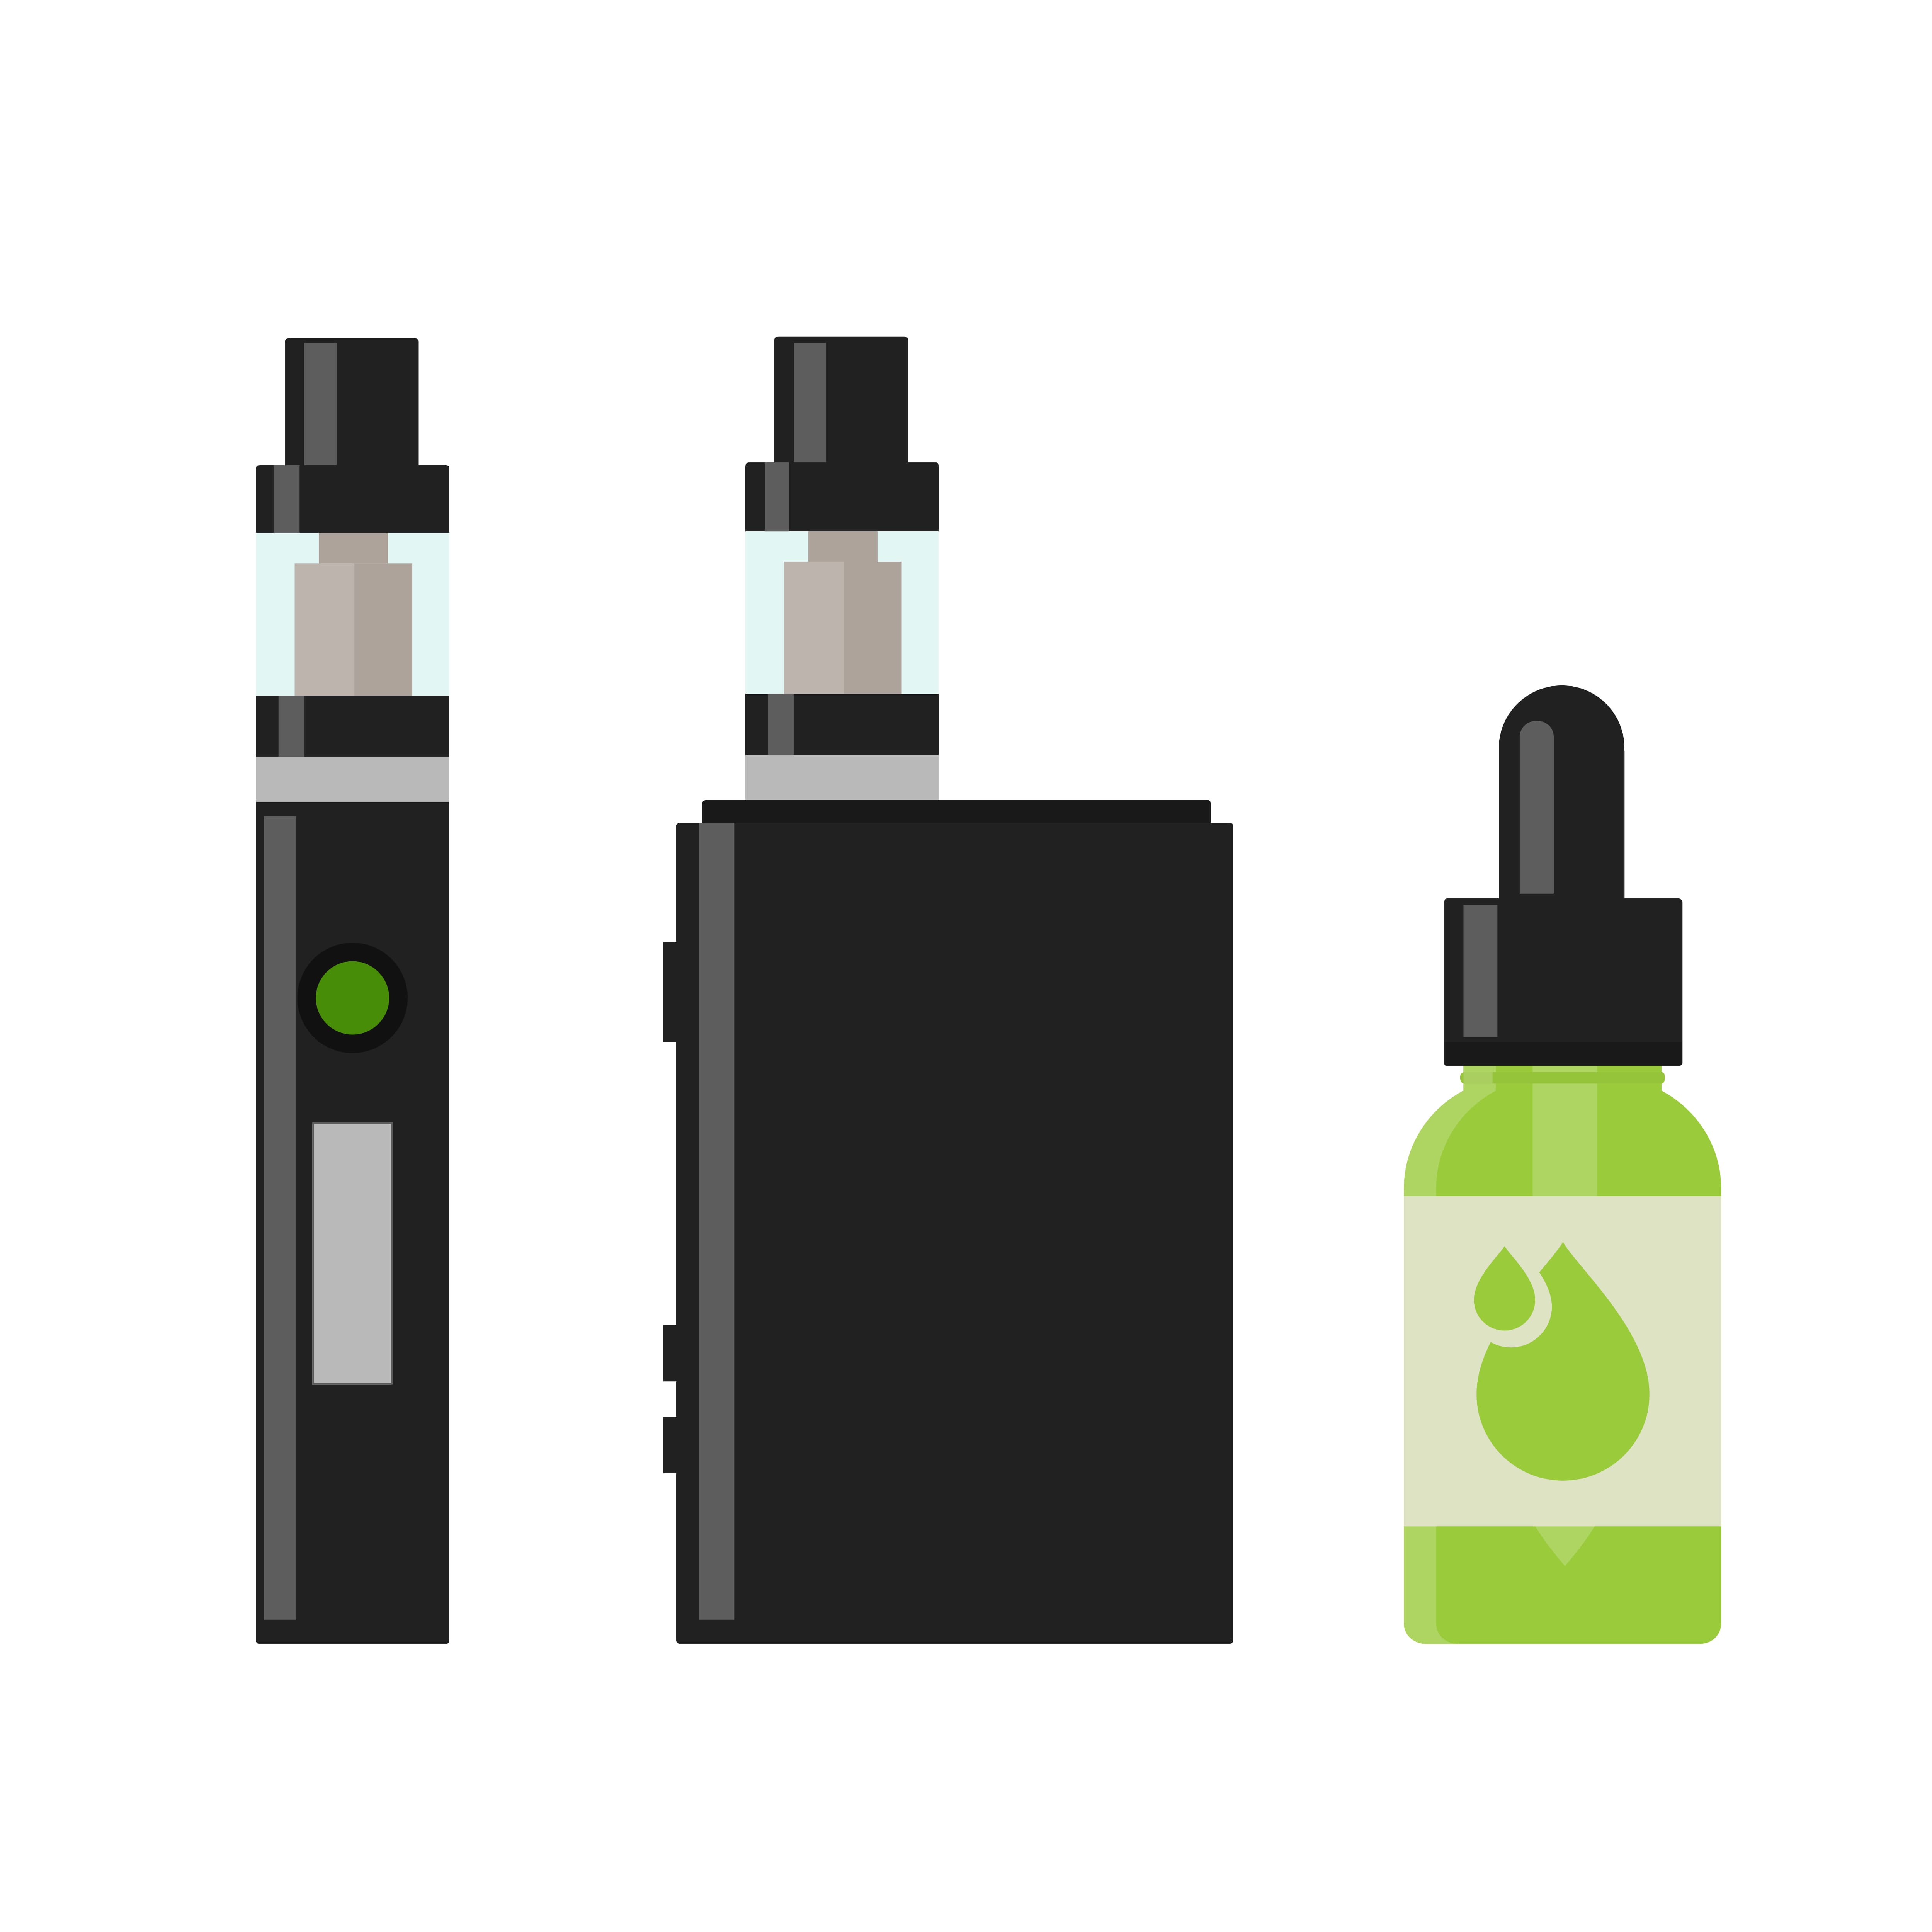 Vaping products